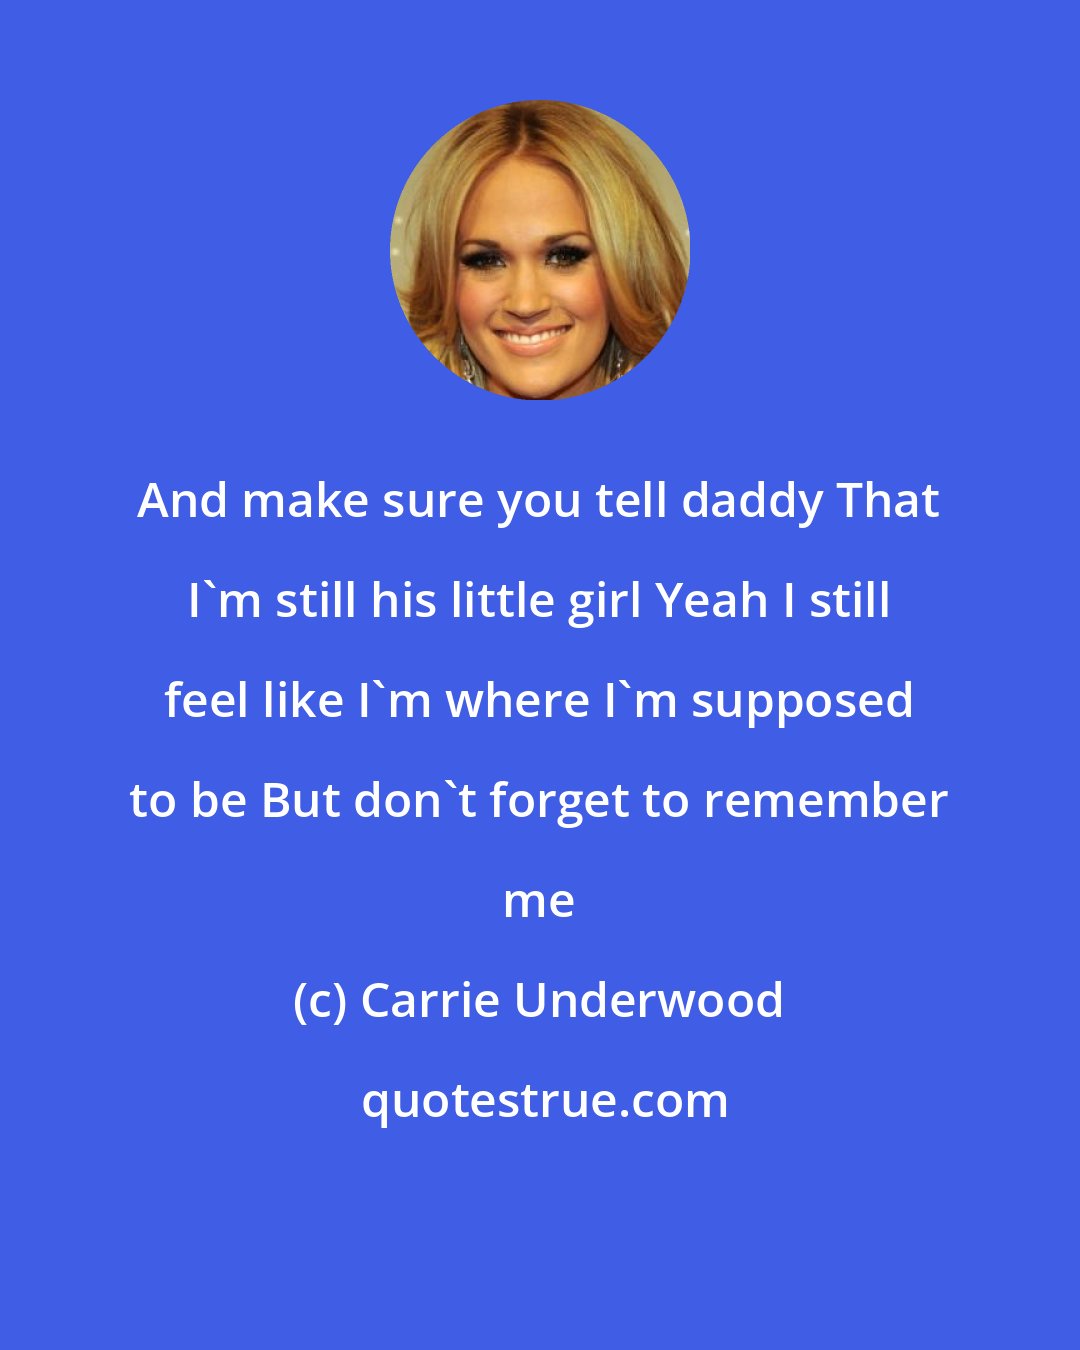 Carrie Underwood: And make sure you tell daddy That I'm still his little girl Yeah I still feel like I'm where I'm supposed to be But don't forget to remember me